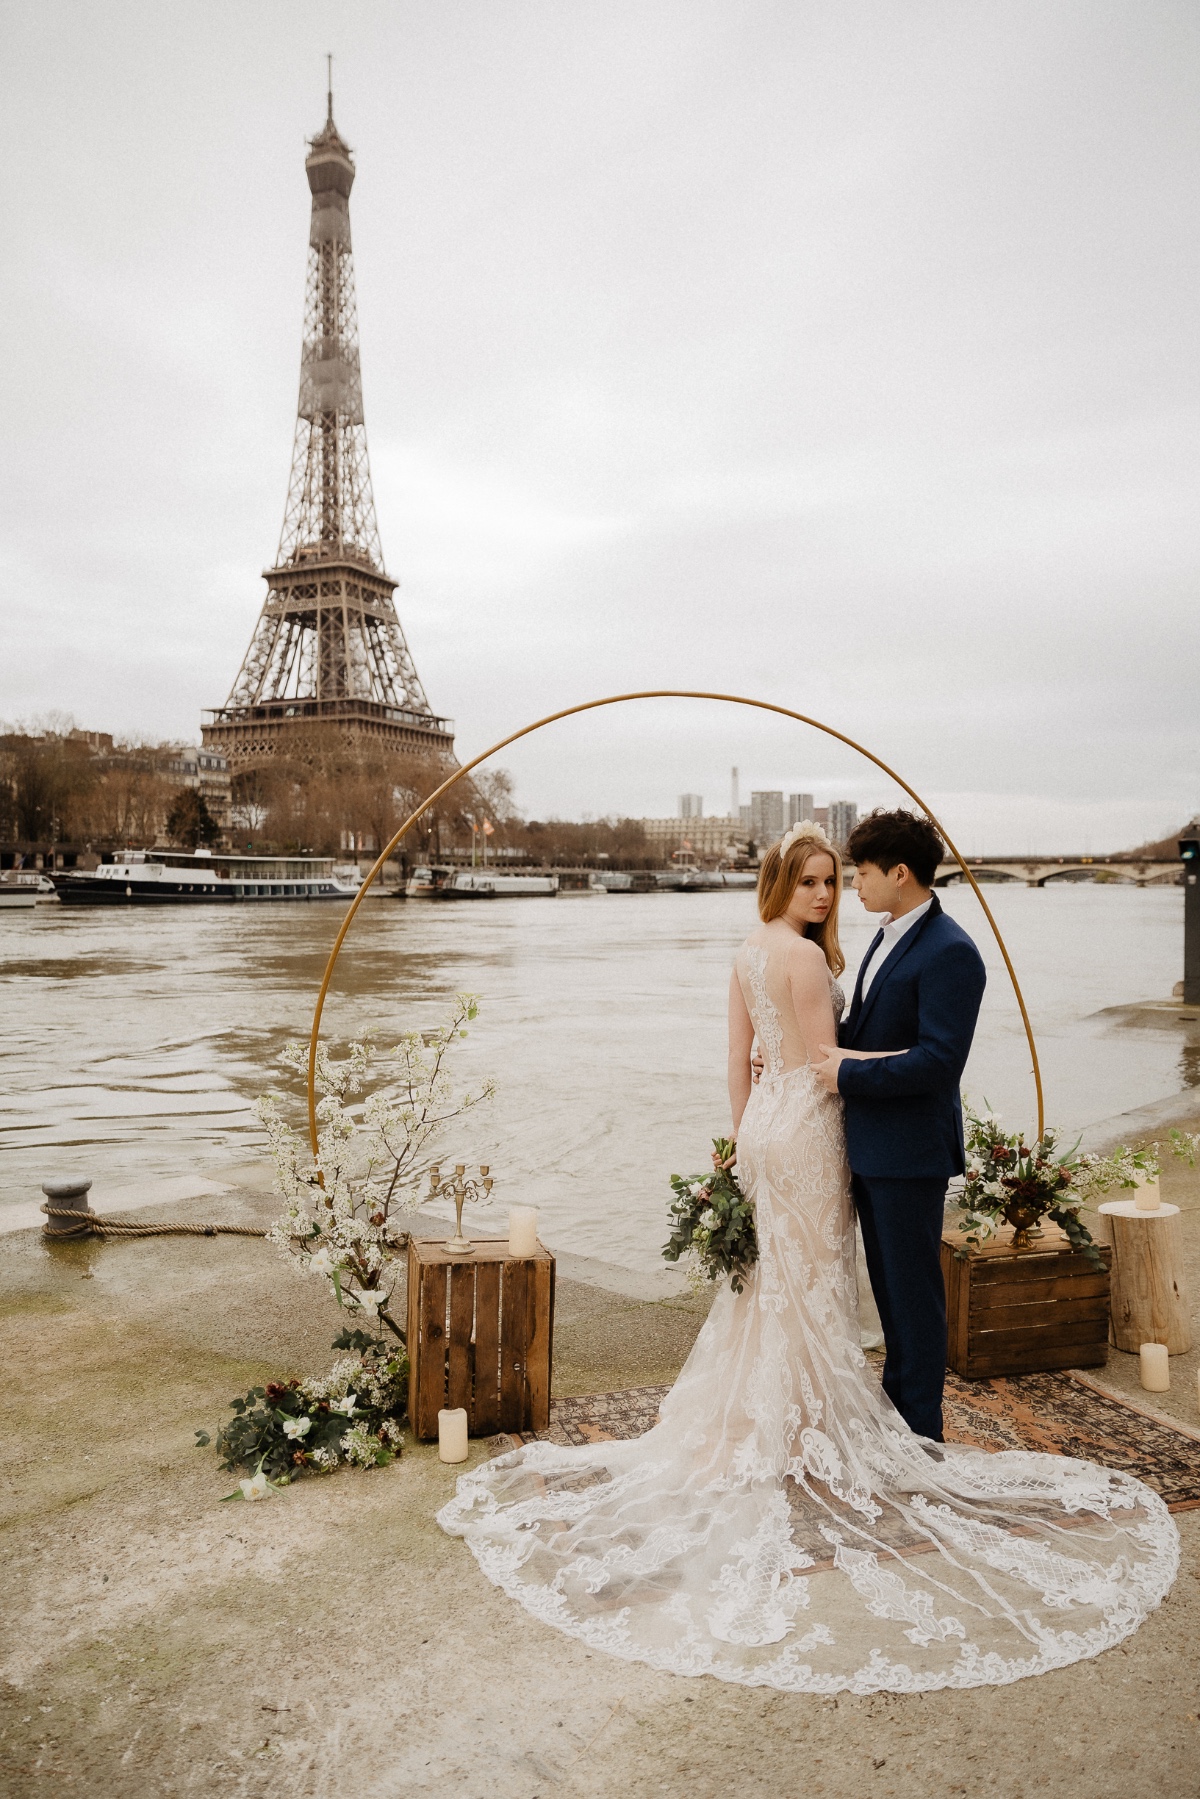 French elopement in front of the Seine River